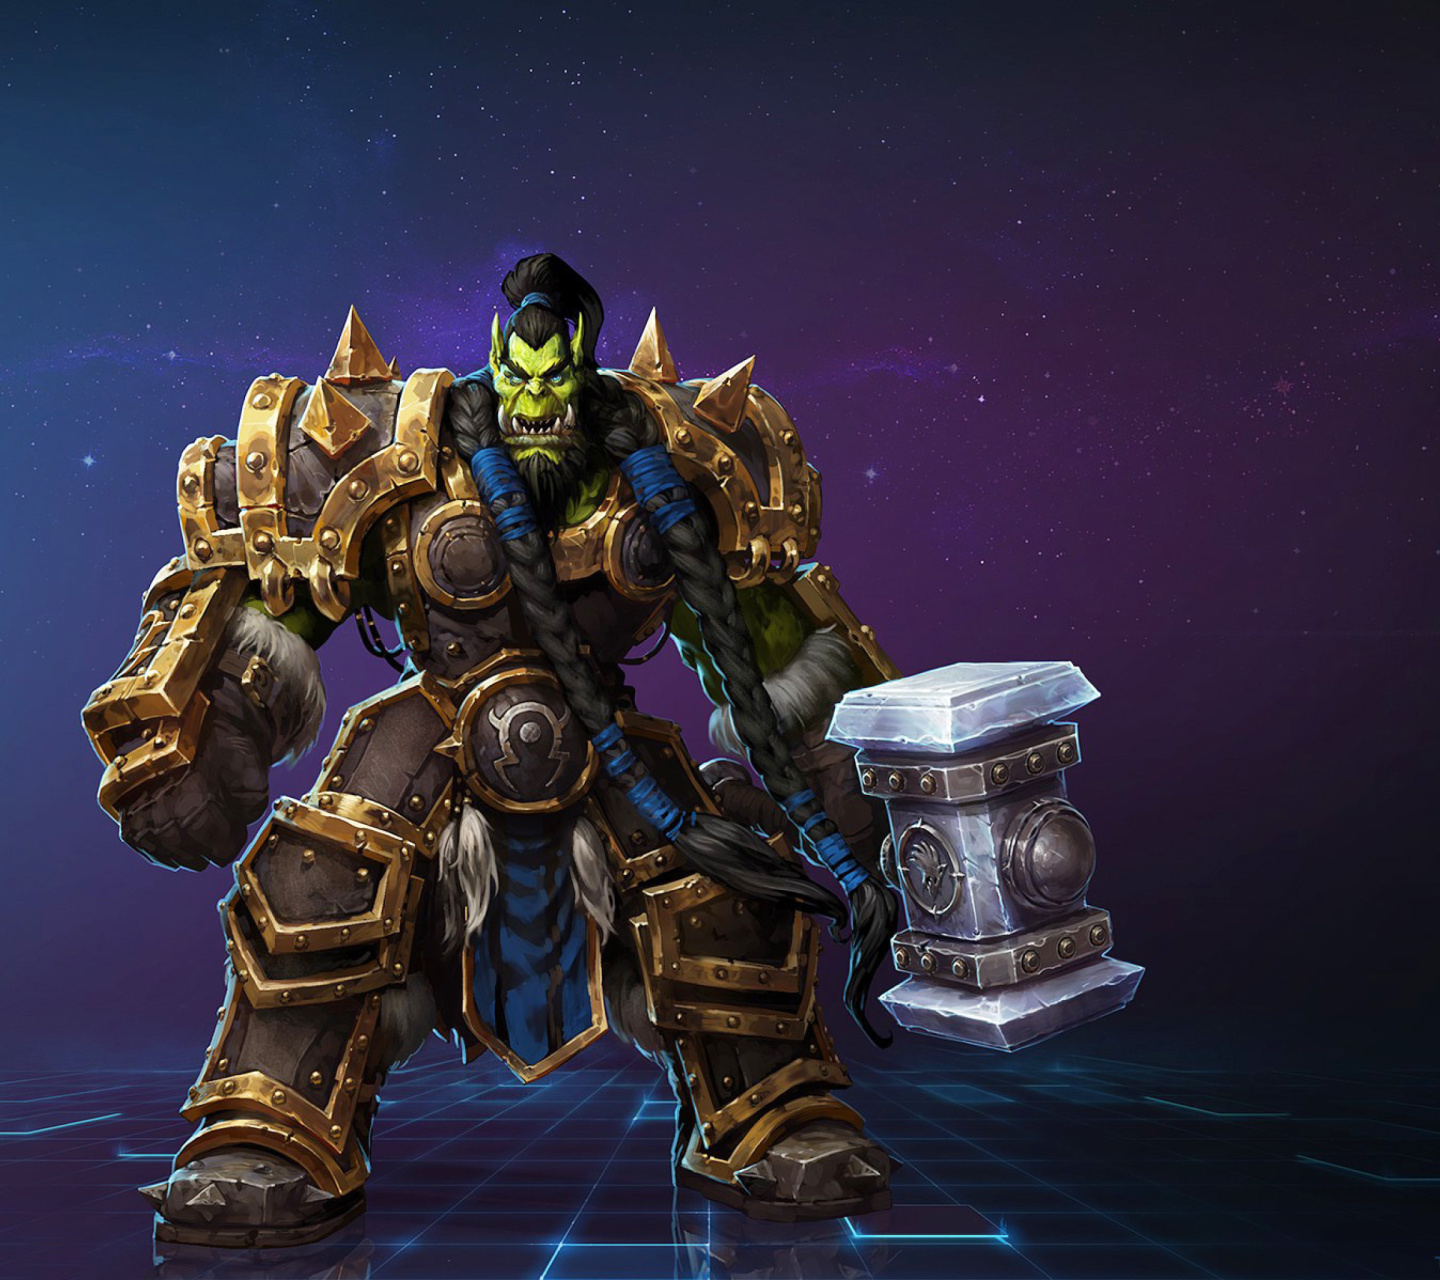 Heroes of the Storm multiplayer online battle arena video game screenshot #1 1440x1280